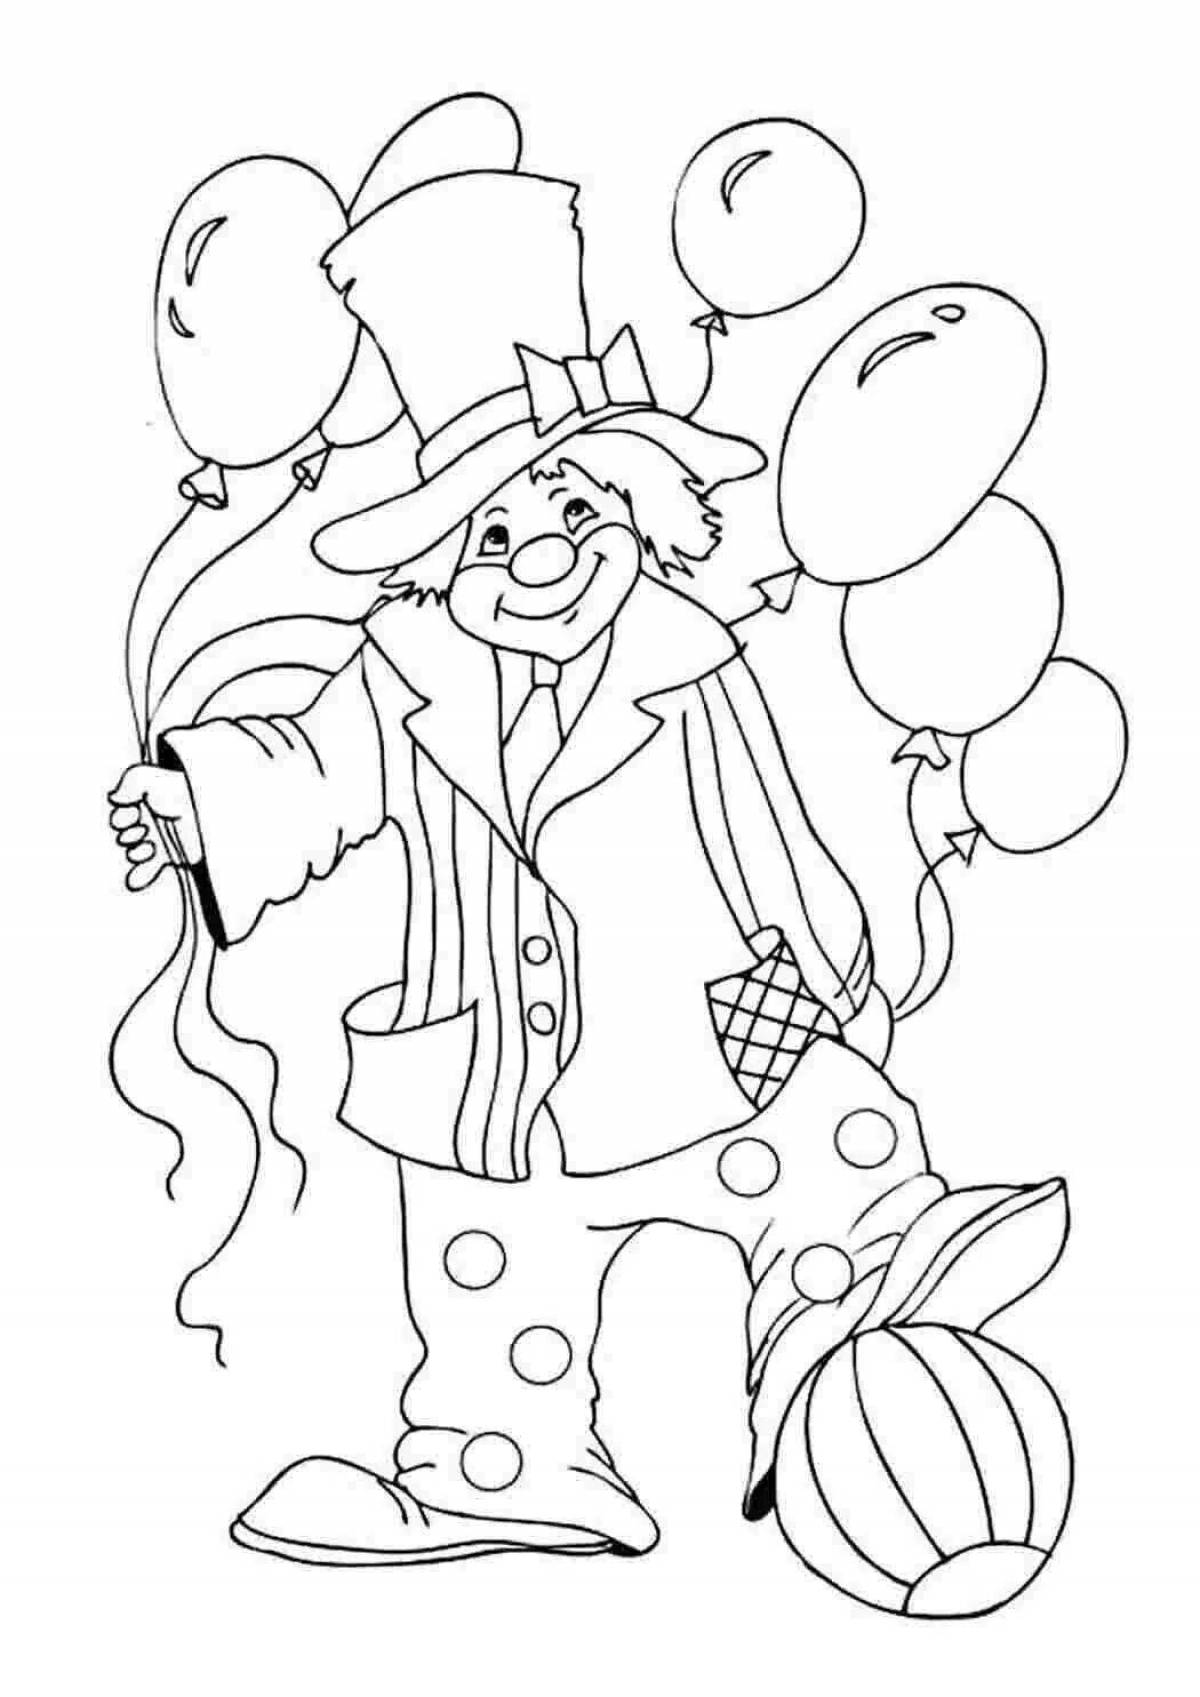 Charming coloring page visiting a clown